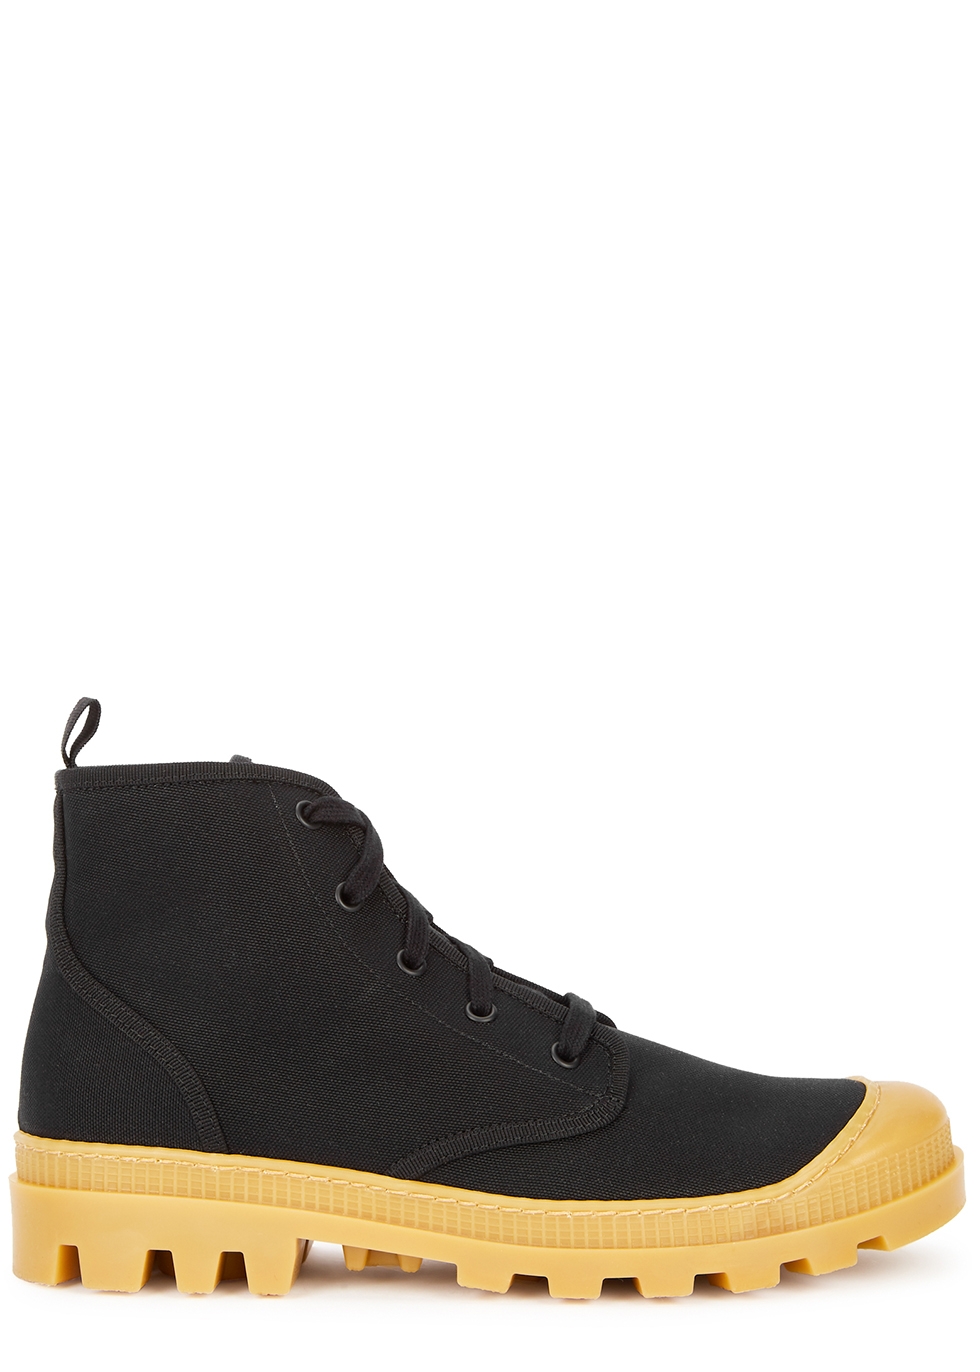 gilby mckinley ankle boots